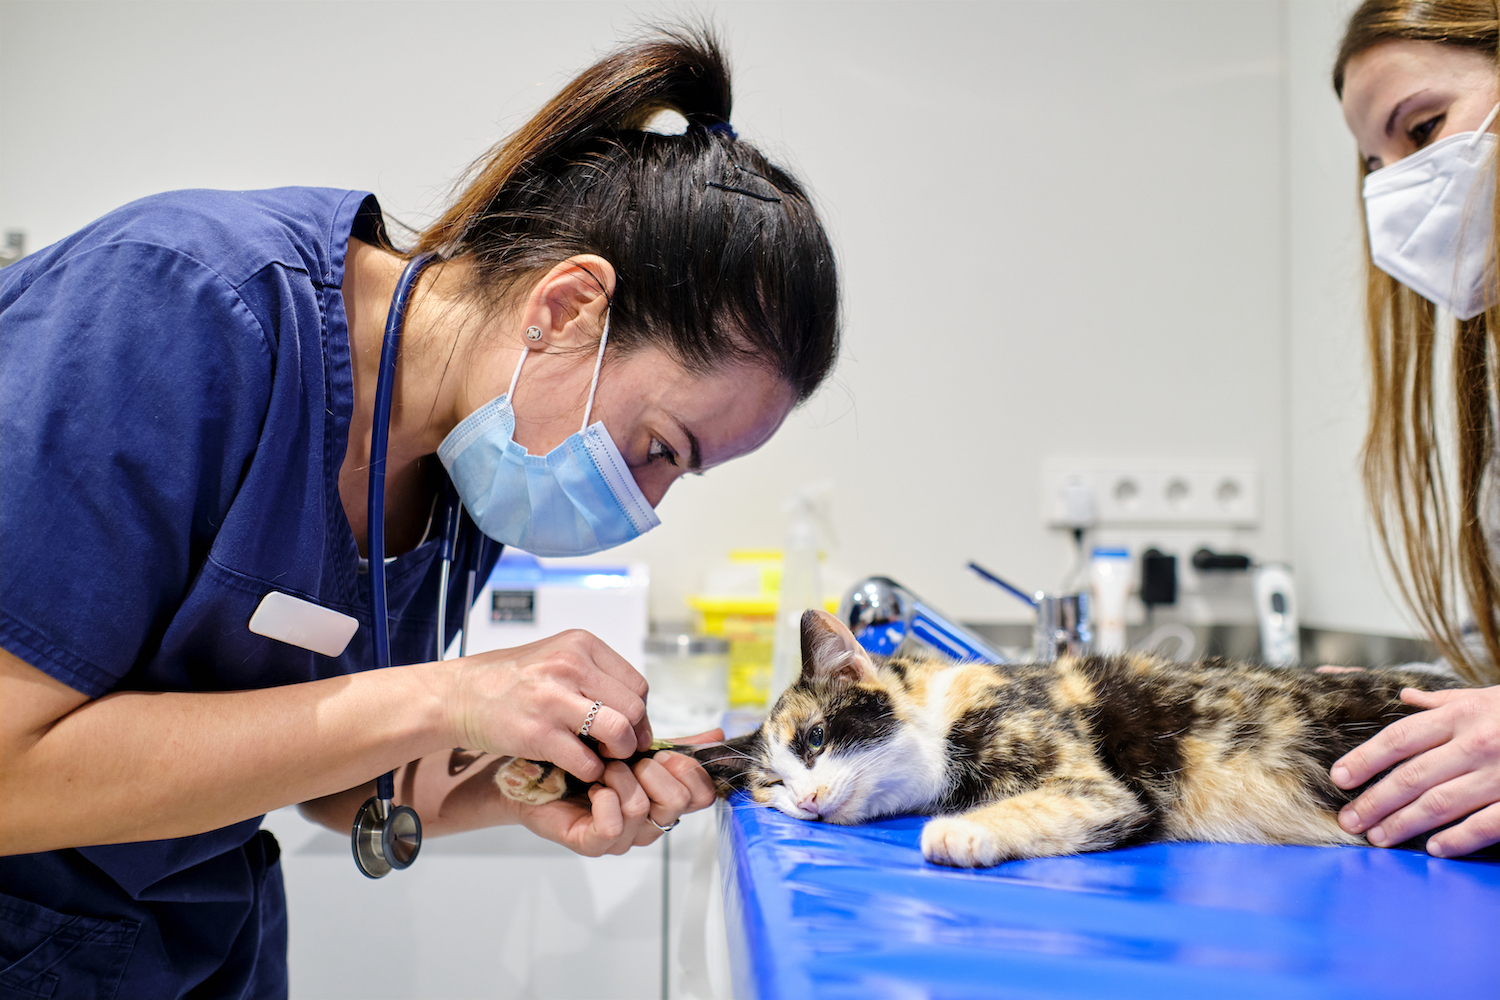 A vet worker taking care of a cat